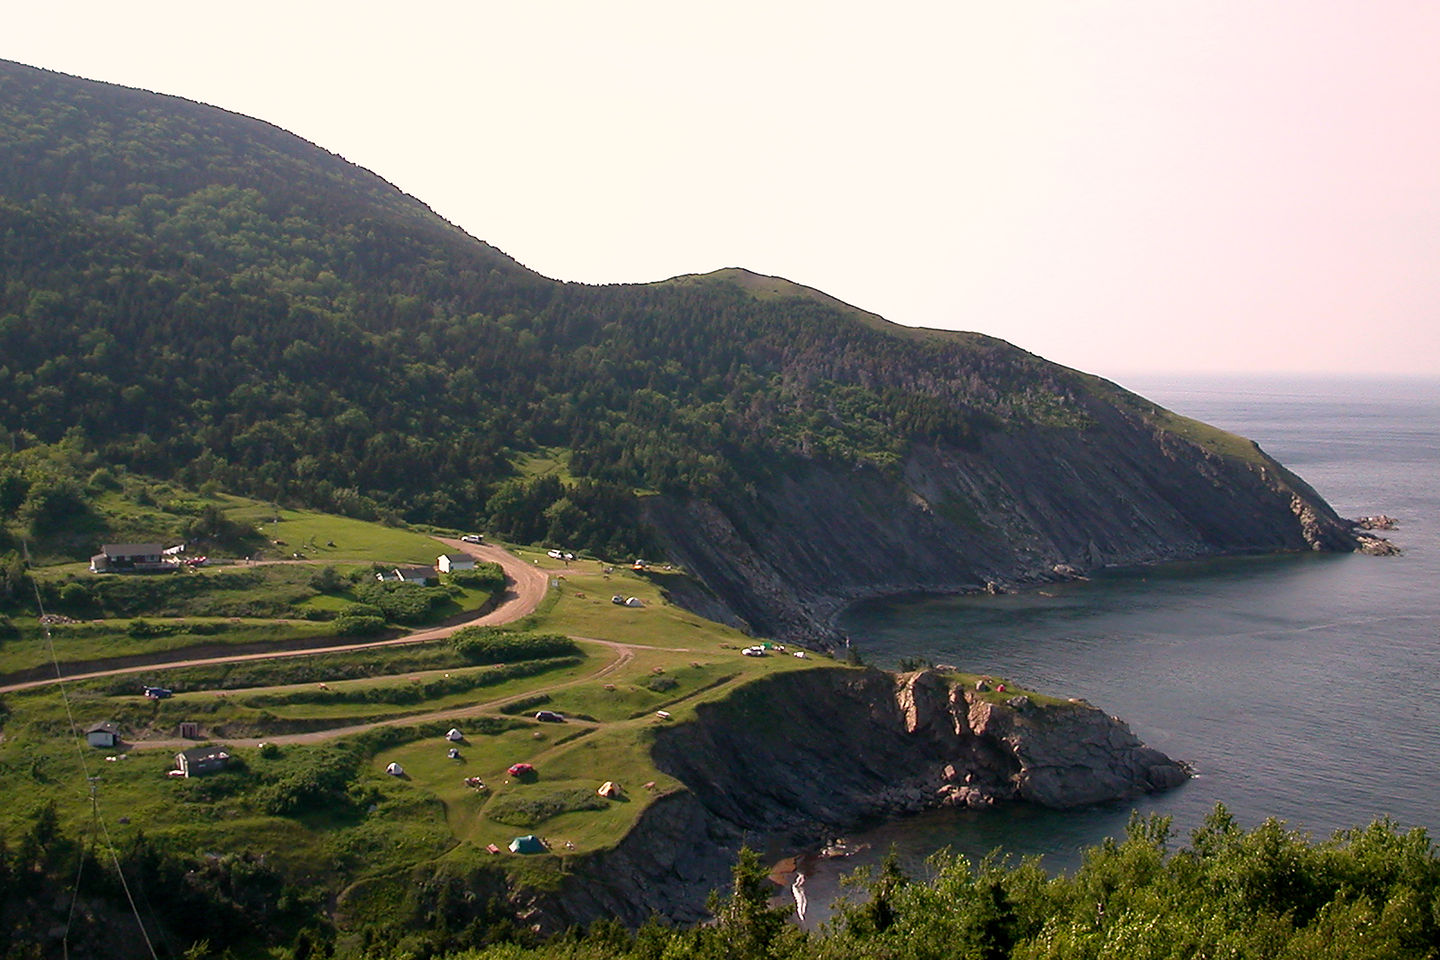 Approach to Meat Cove